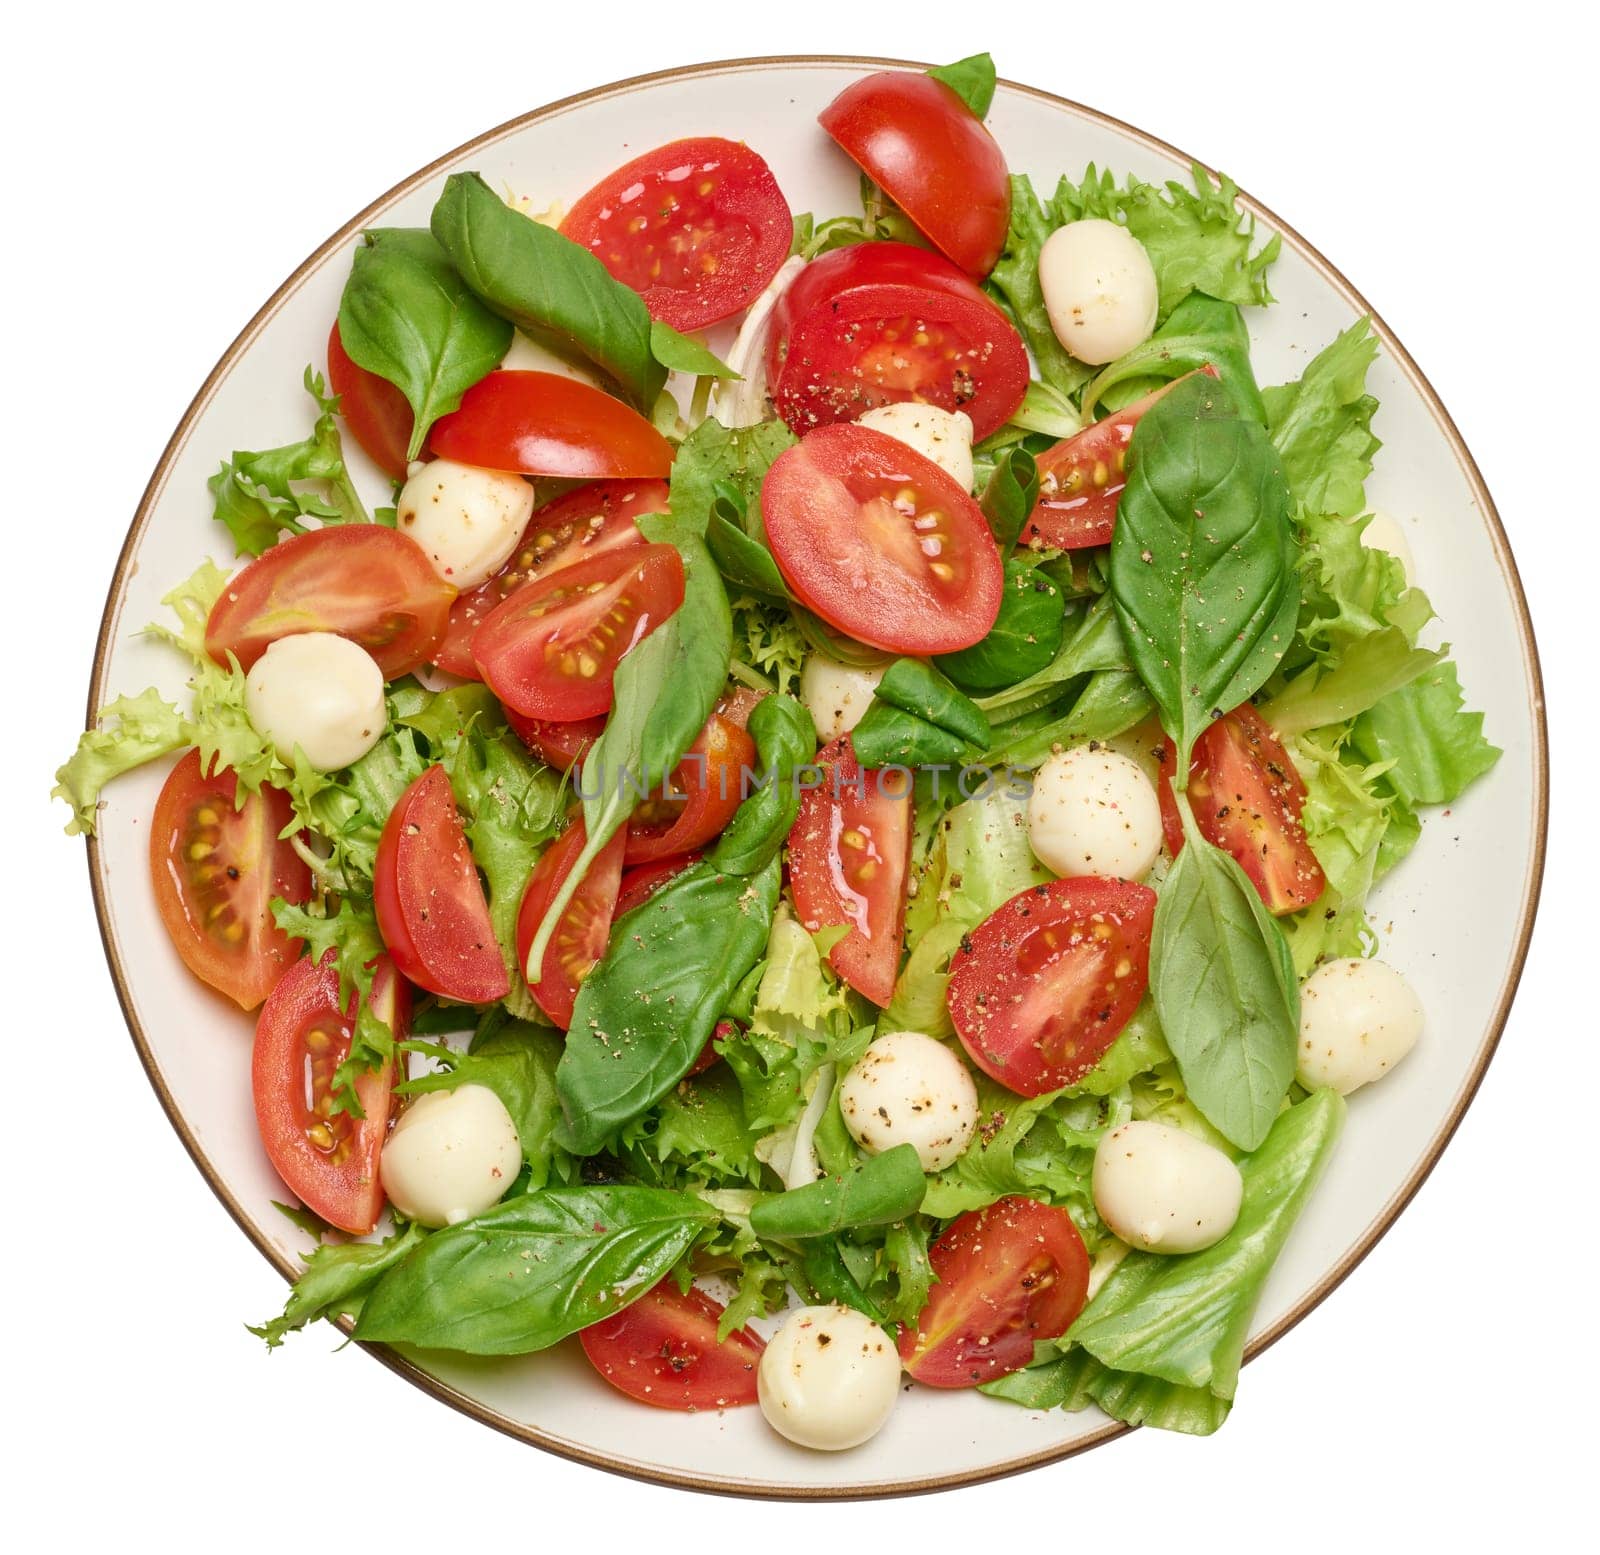 Salad with mozzarella, cherry tomatoes and green lettuce in a white round plate, isolated background. Topp view